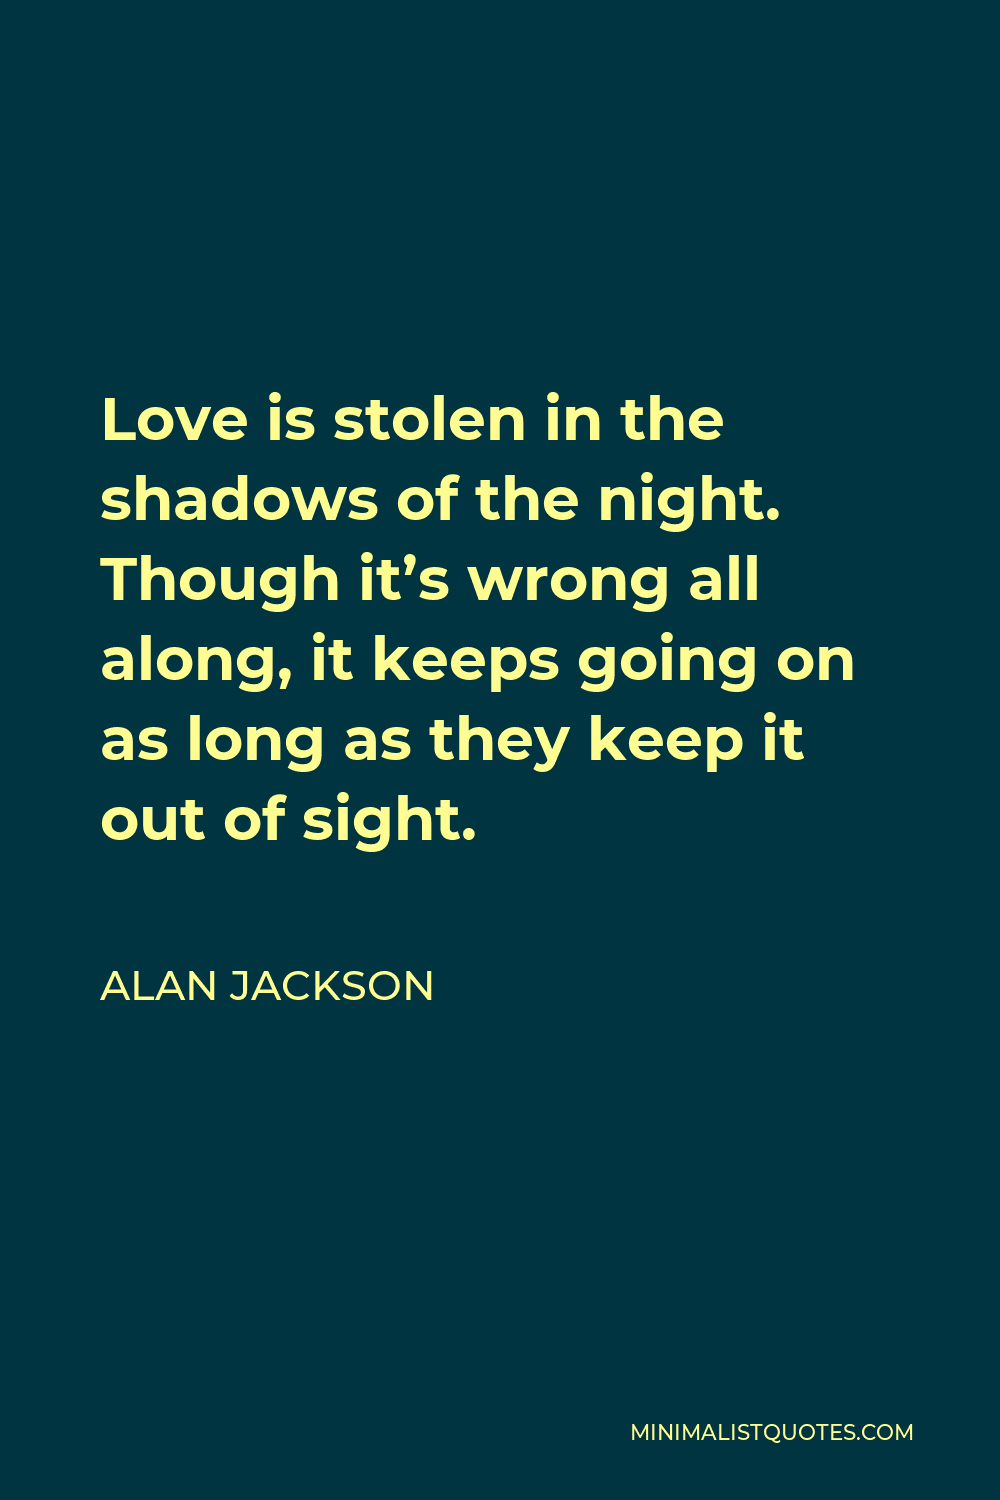 Alan Jackson Quote - Love is stolen in the shadows of the night. Though it’s wrong all along, it keeps going on as long as they keep it out of sight.